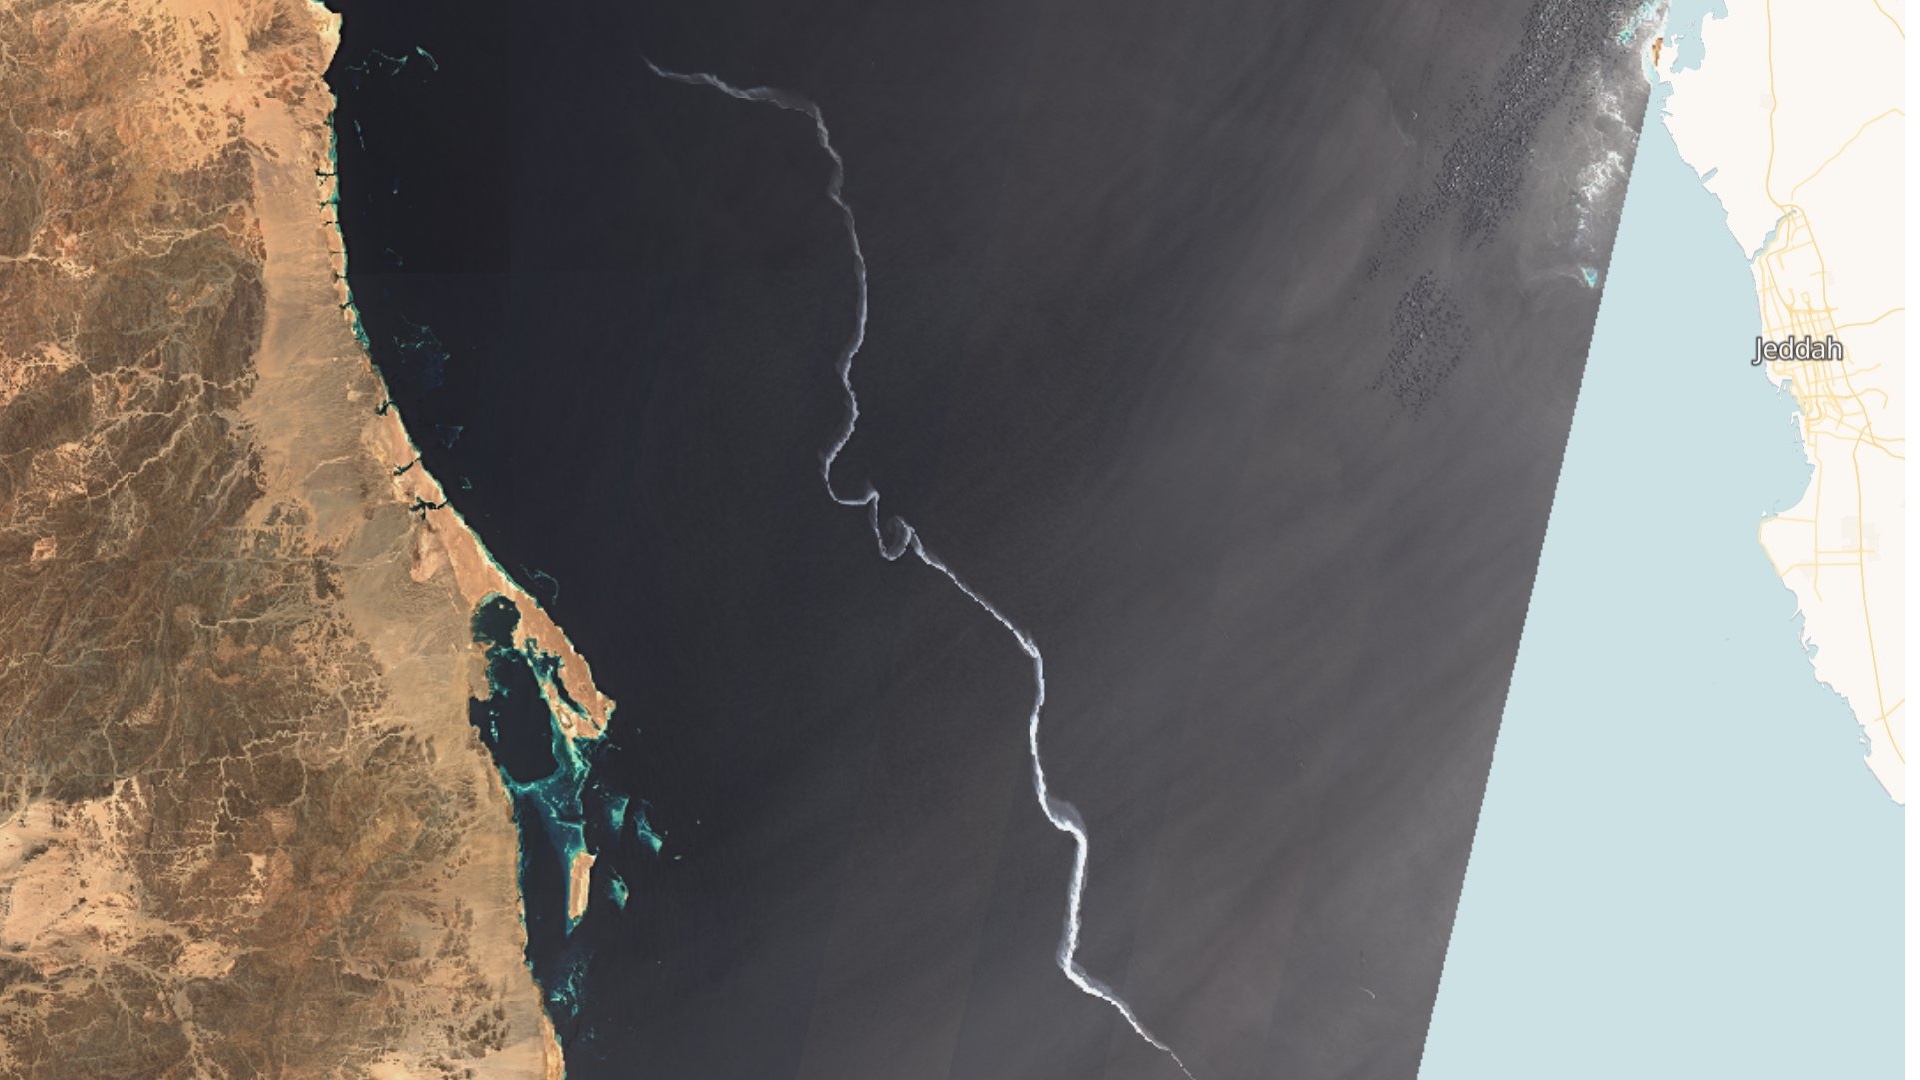 Imagery by the Sentinel-2 L1C satellite revealing the oil spill on 14 May (Sentinel-2 L1C)